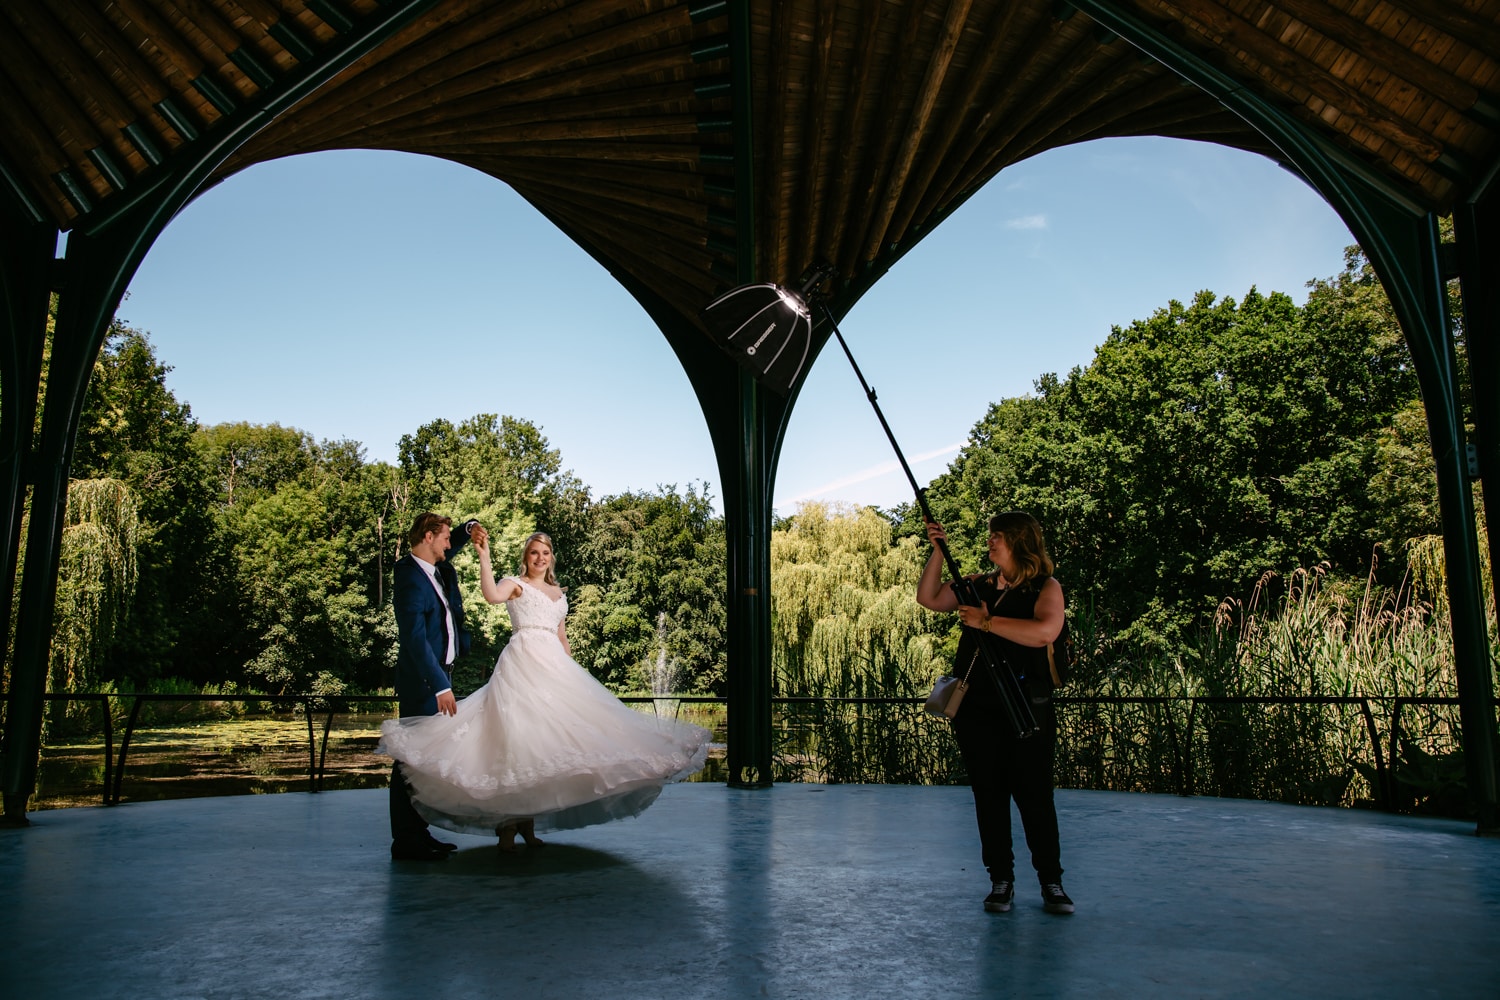 A bride and groom pose for their wedding photographer in a gazebo.